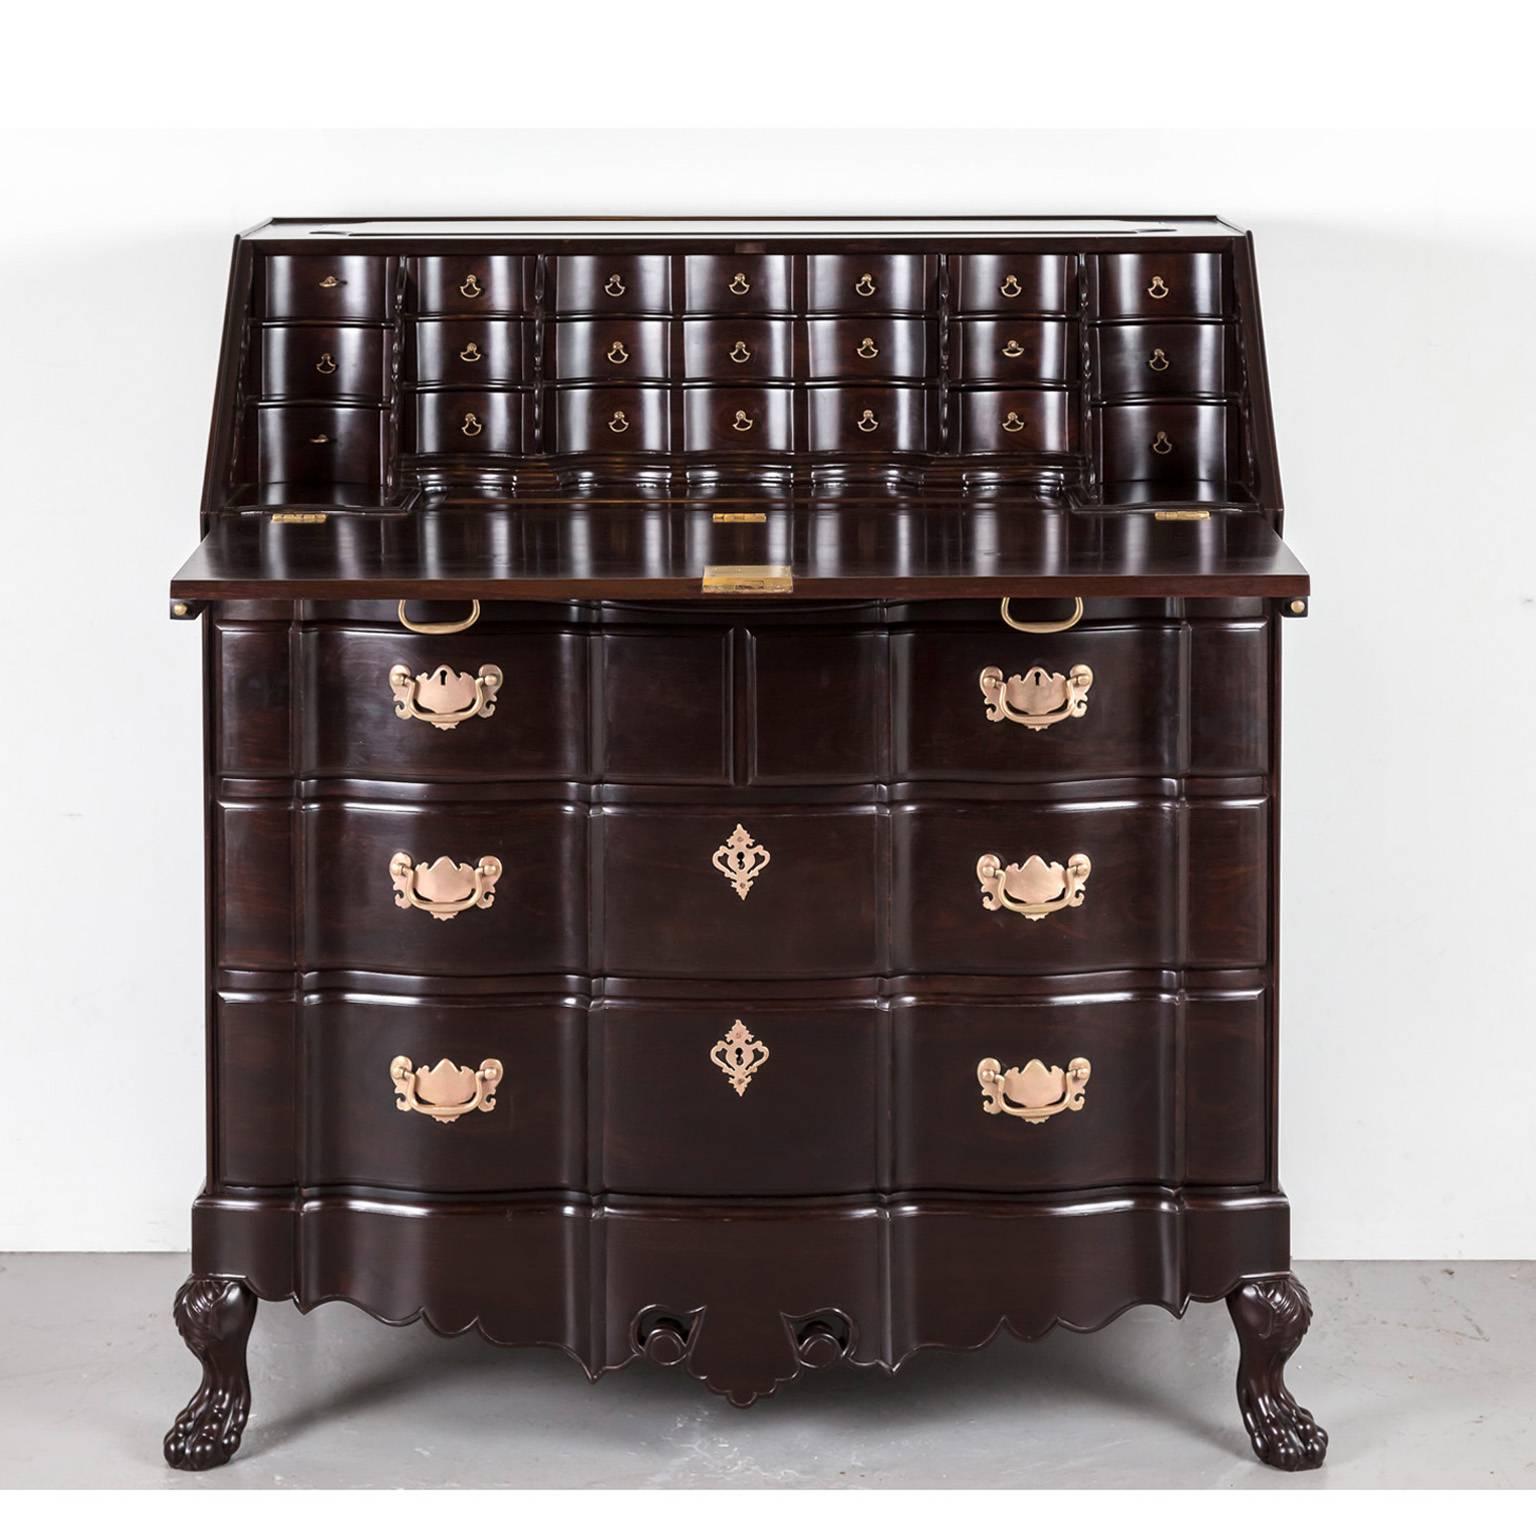 A magnificent British colonial drop front bureau in rosewood with original brass carrying handles on the sides. 
It has a beautiful stepped and serpentine shaped interior with small drawers that are segmented over three rows. The larger sized